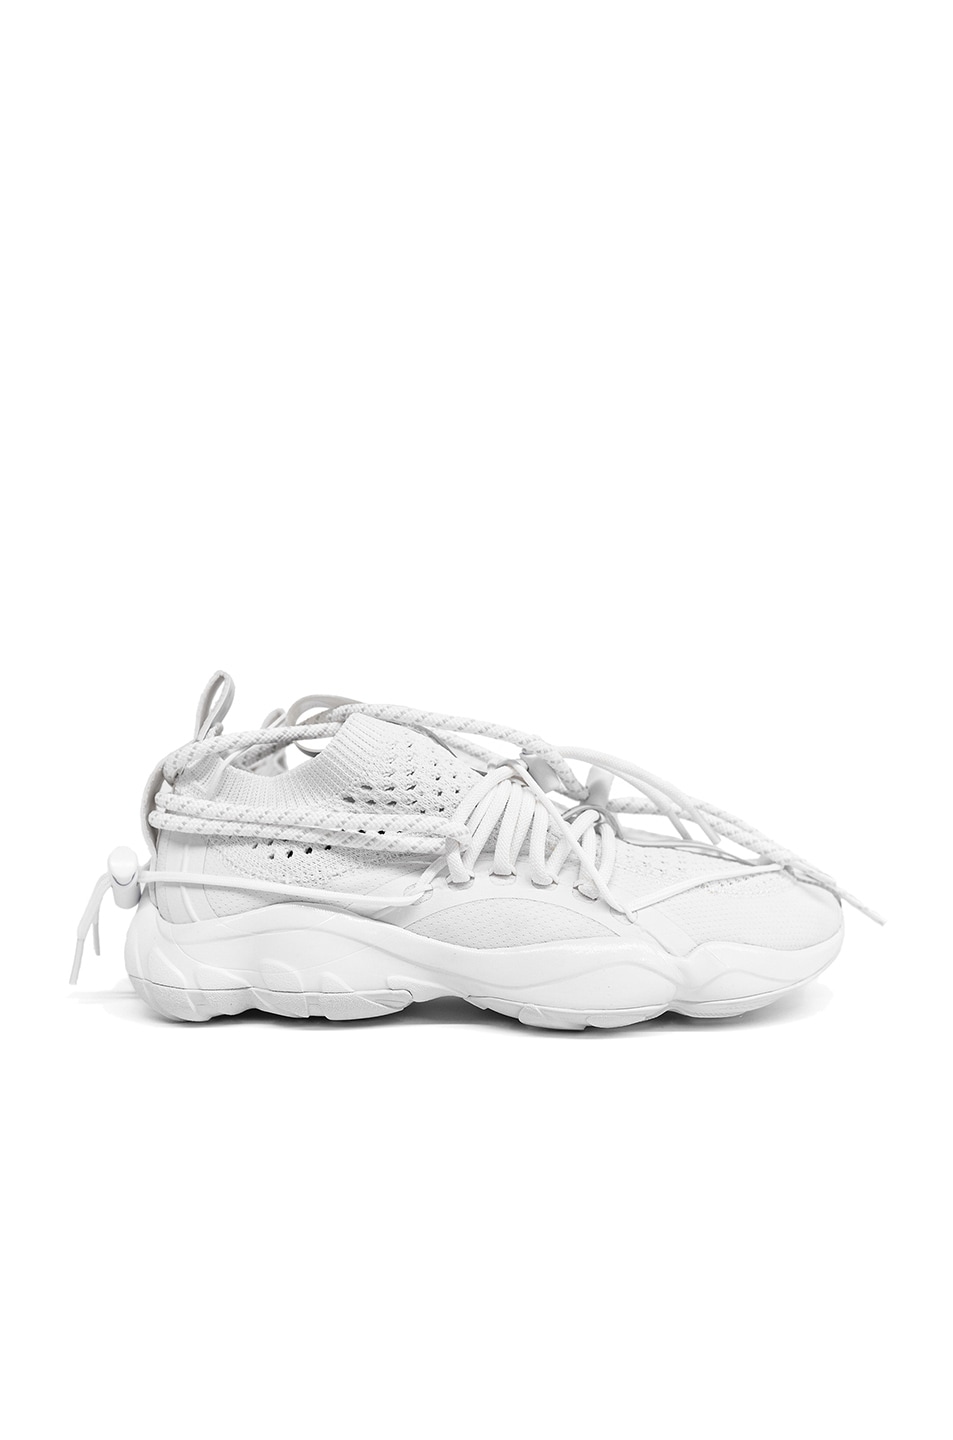 Image 1 of Pyer Moss x Reebok DMX Fusion Experiment in White